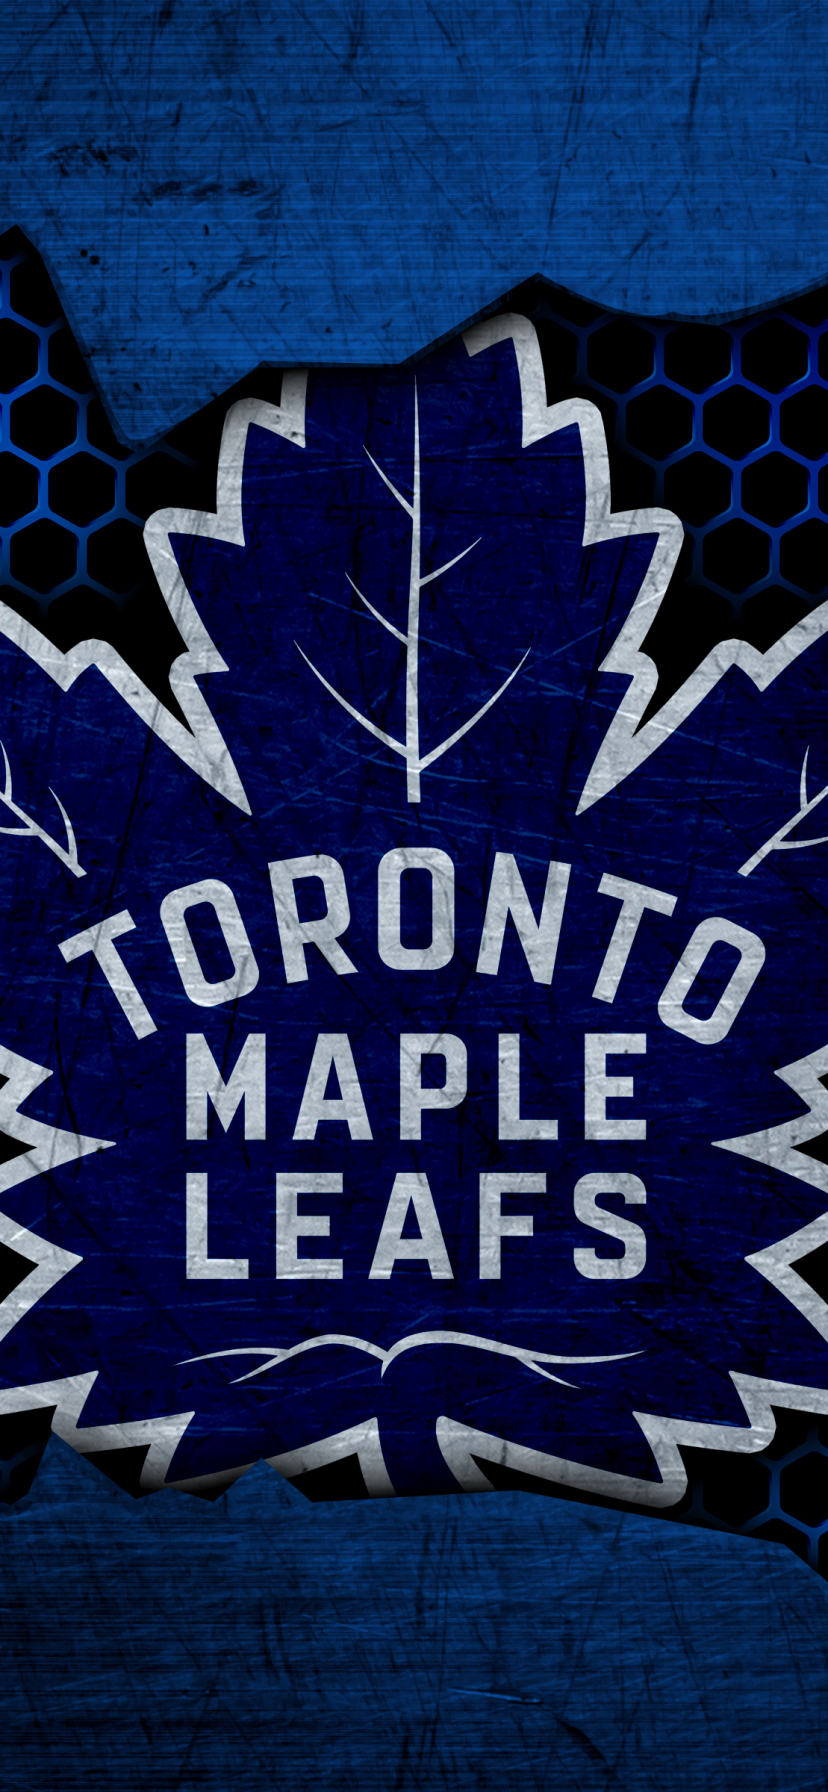 toronto maple leafs wallpaper for iphone - Google Search  Toronto maple  leafs wallpaper, Maple leafs wallpaper, Toronto maple leafs logo